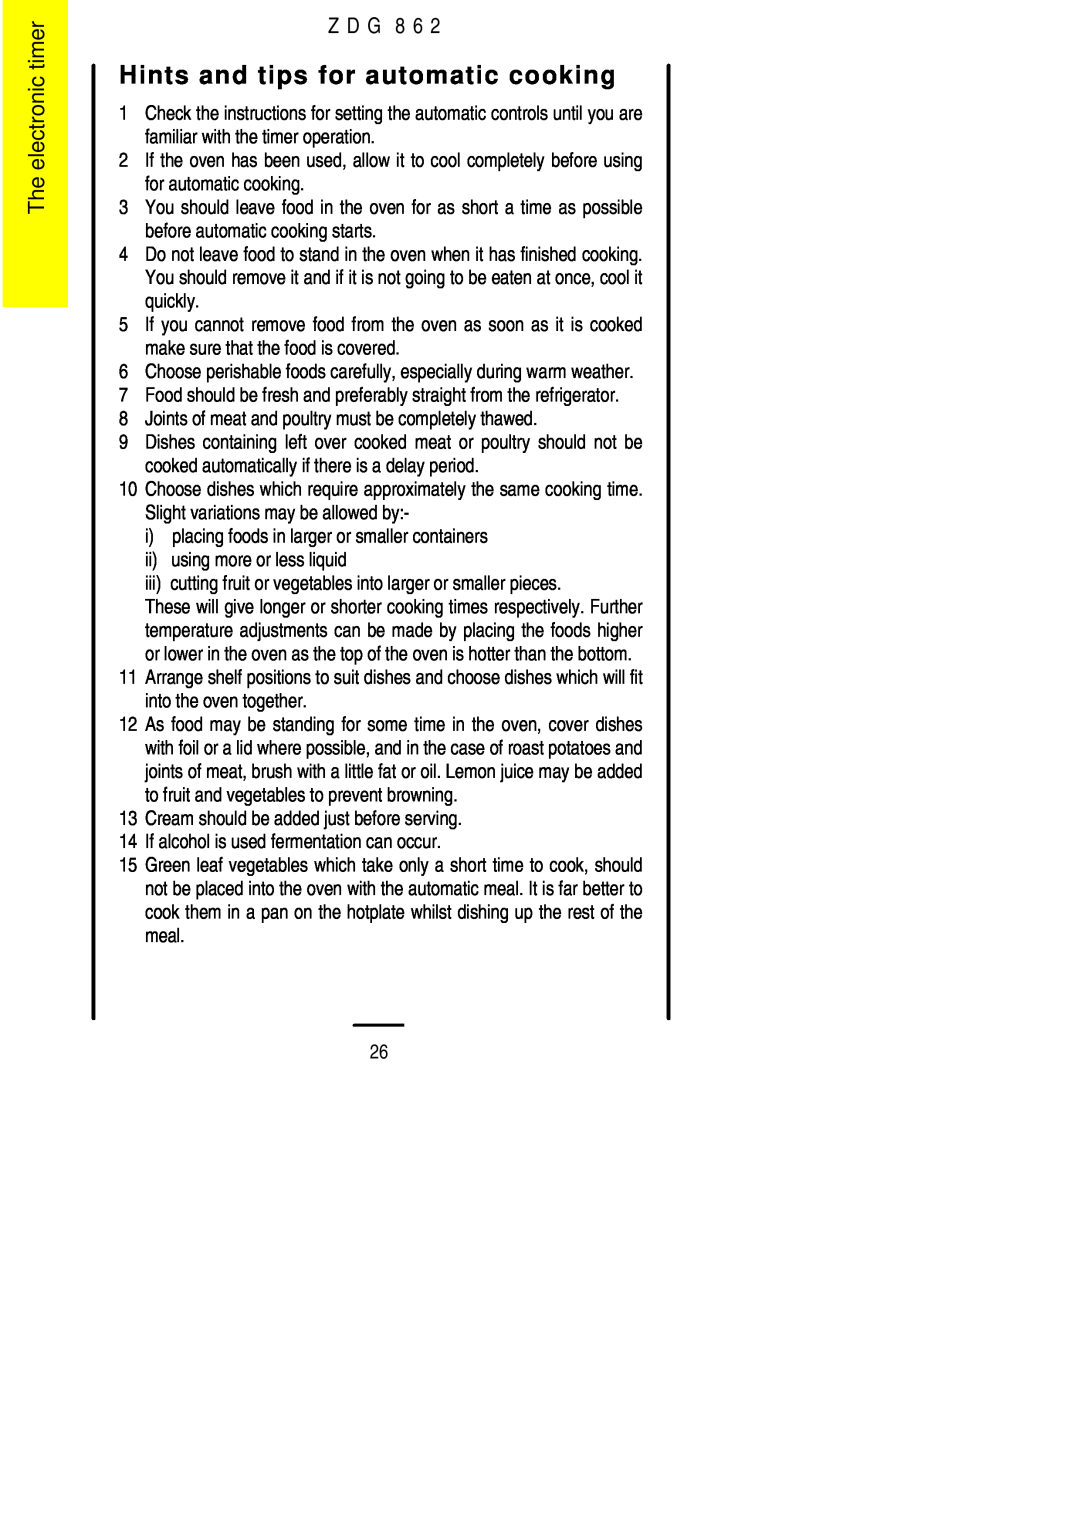 Zanussi ZDG 862 manual Hints and tips for automatic cooking, The electronic timer, Z D G 8 6 